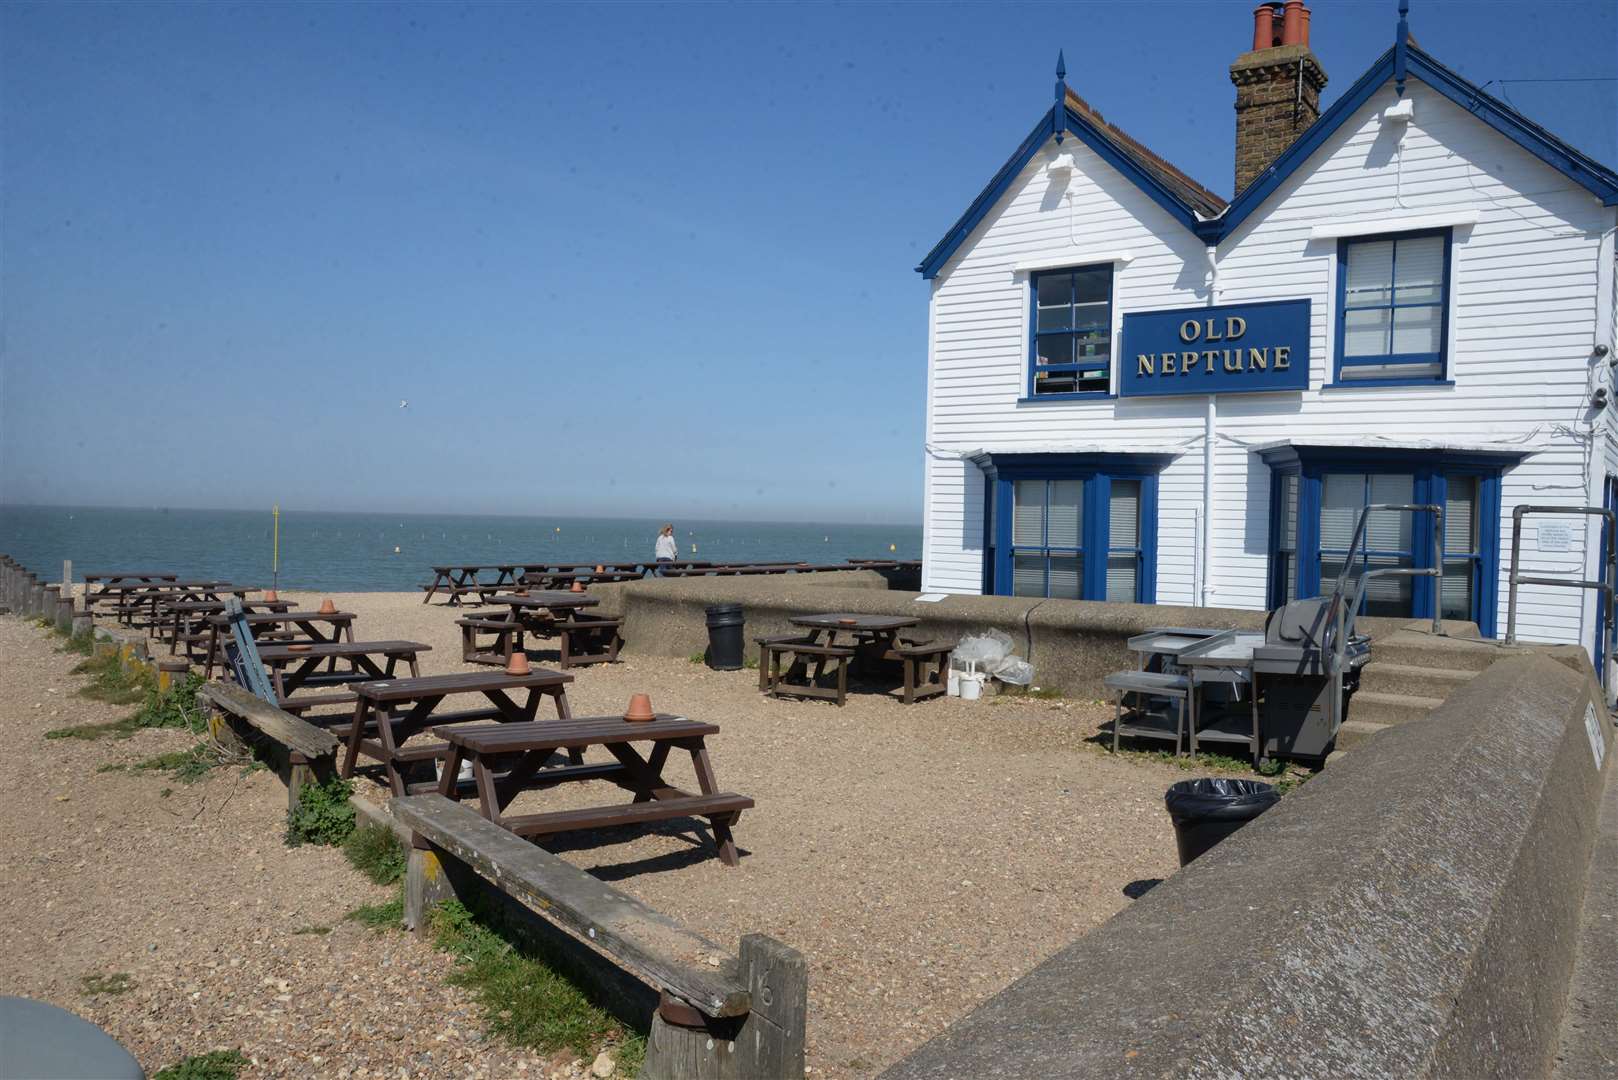 The "iconic" Old Neptune pub on West Beach, Whitstable